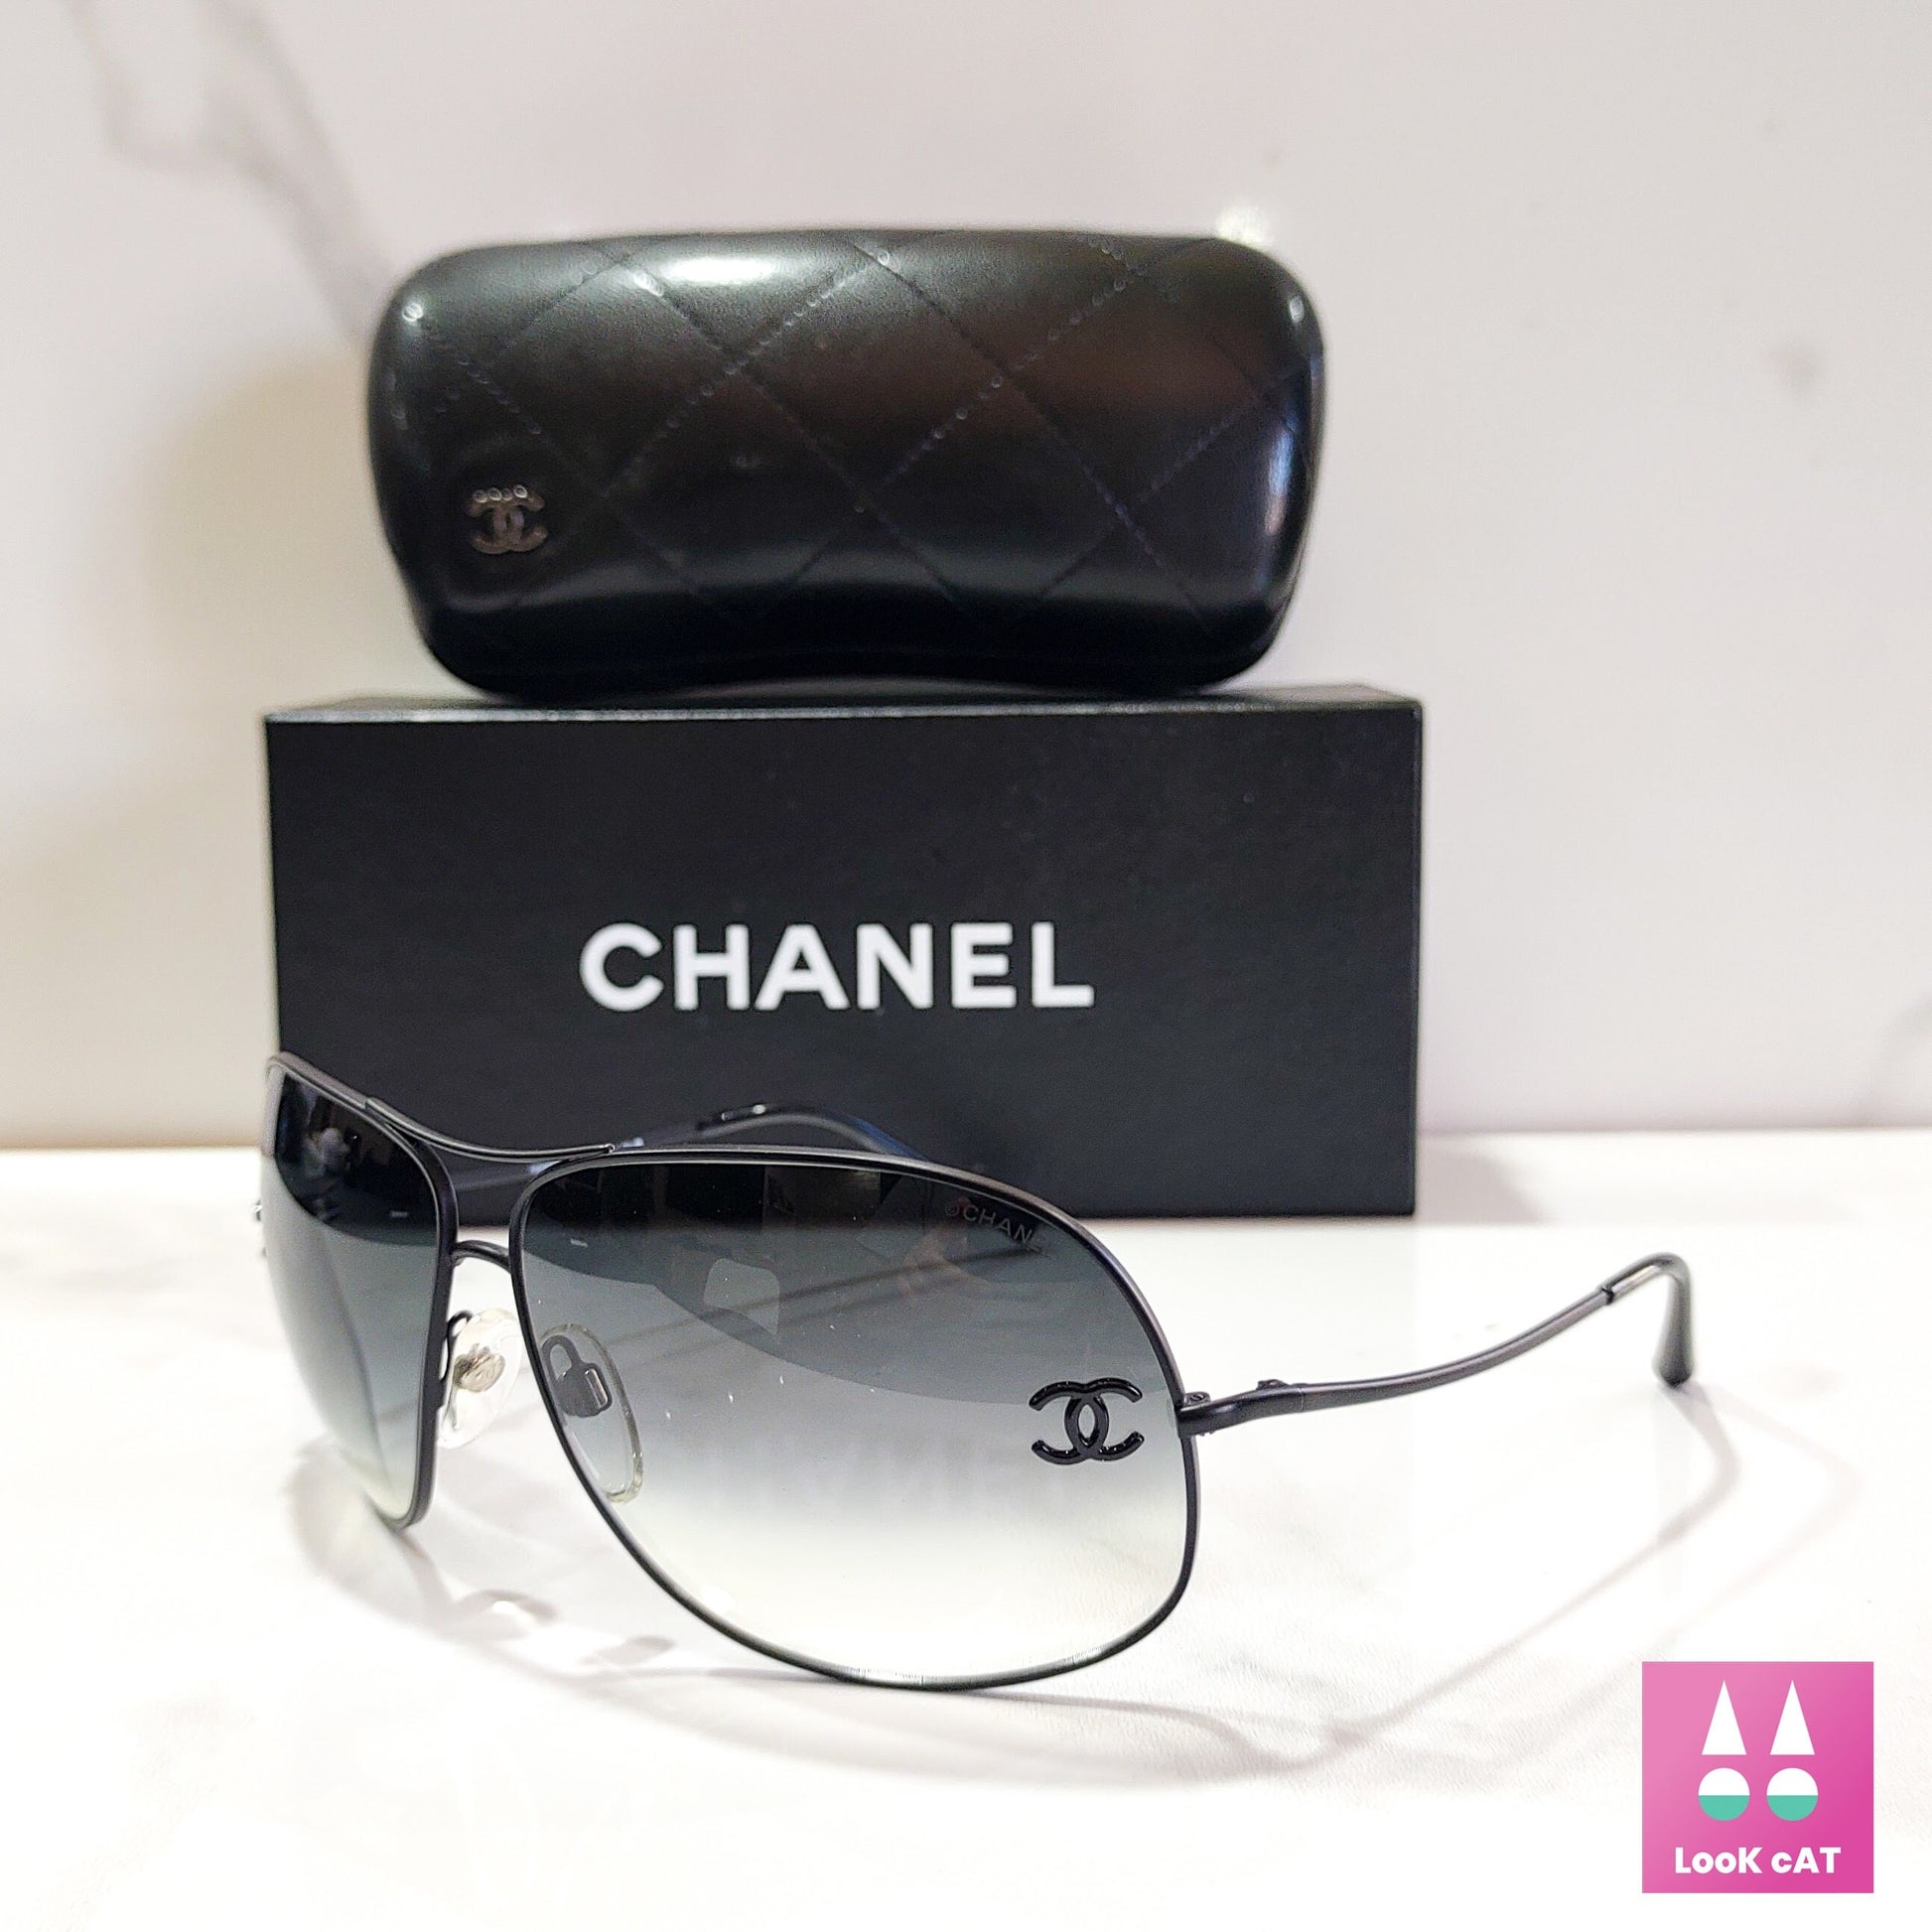 Chanel sunglasses model 4132 Nos lunette brille y2k shades new old sto –  LookcatSunglasses